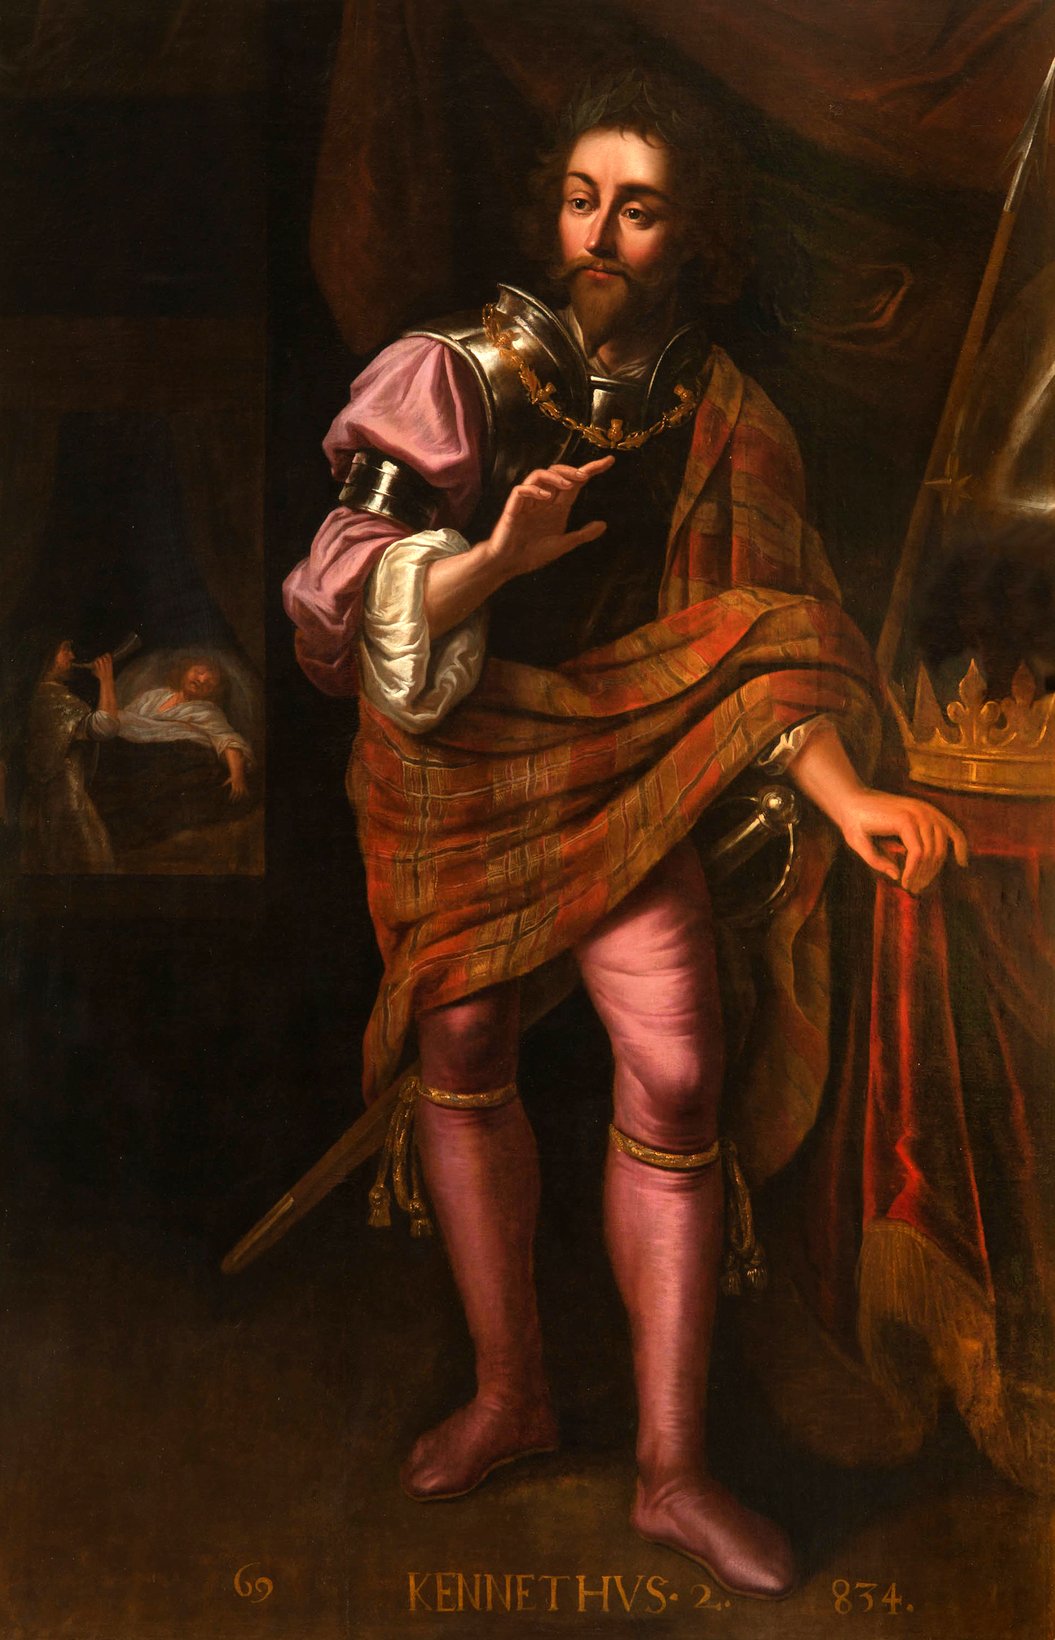 A painting of Kenneth MacAlpin, King of Scotland (843-63). The man is wearing a body plate and a tartan. His golden crown lays on the table next to him. The background is dark and there is a red curtain on the right side of the painting. There is a small group of people in the background on the left side of the painting. The painting is signed “KENNETHVS. 2. 834.” in the bottom right corner.